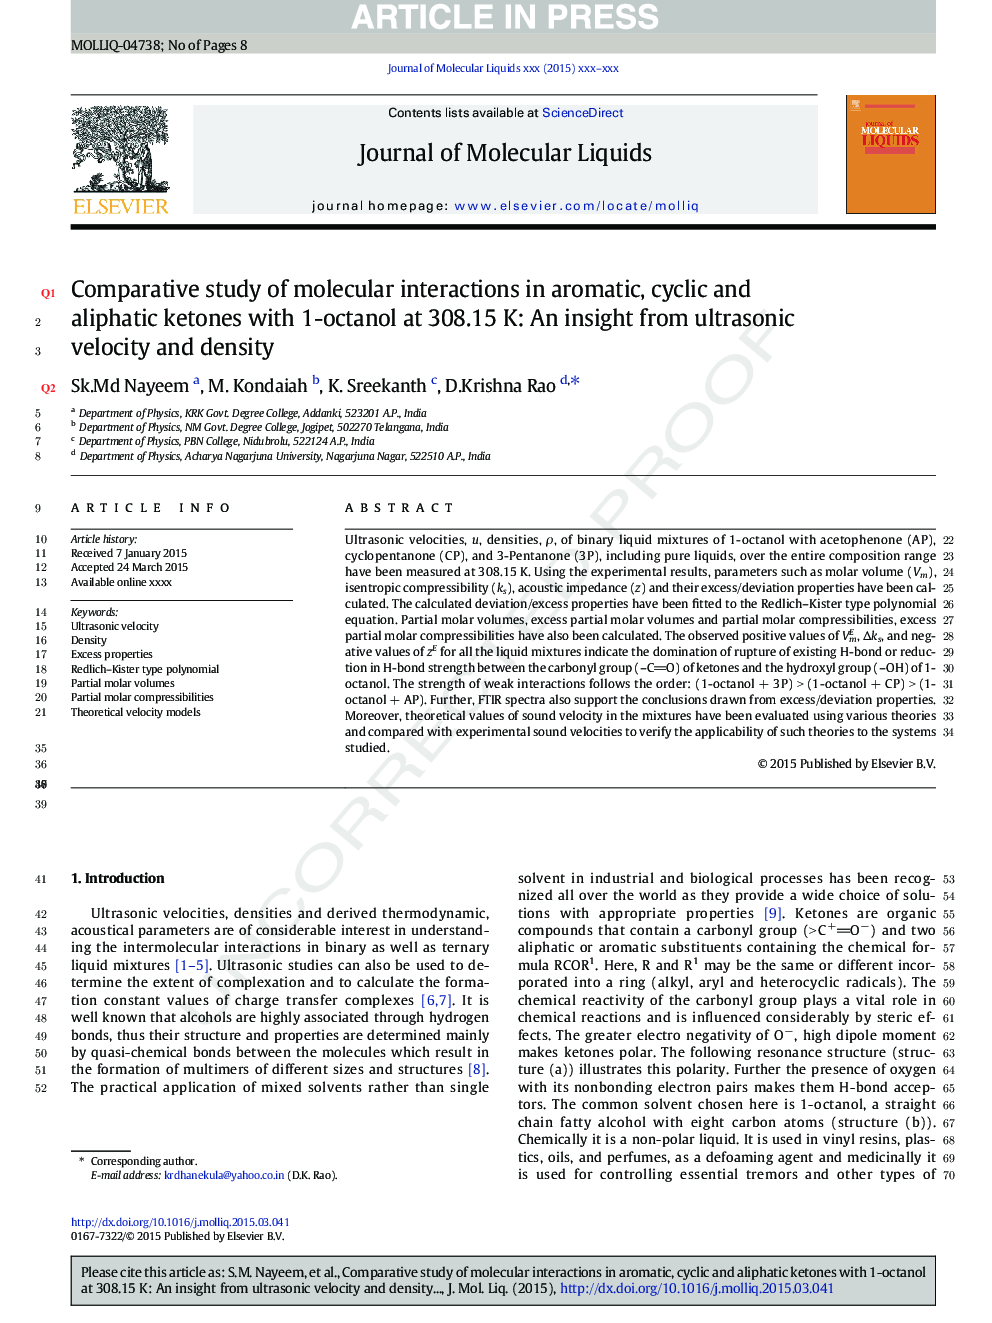 Comparative study of molecular interactions in aromatic, cyclic and aliphatic ketones with 1-octanol at 308.15Â K: An insight from ultrasonic velocity and density